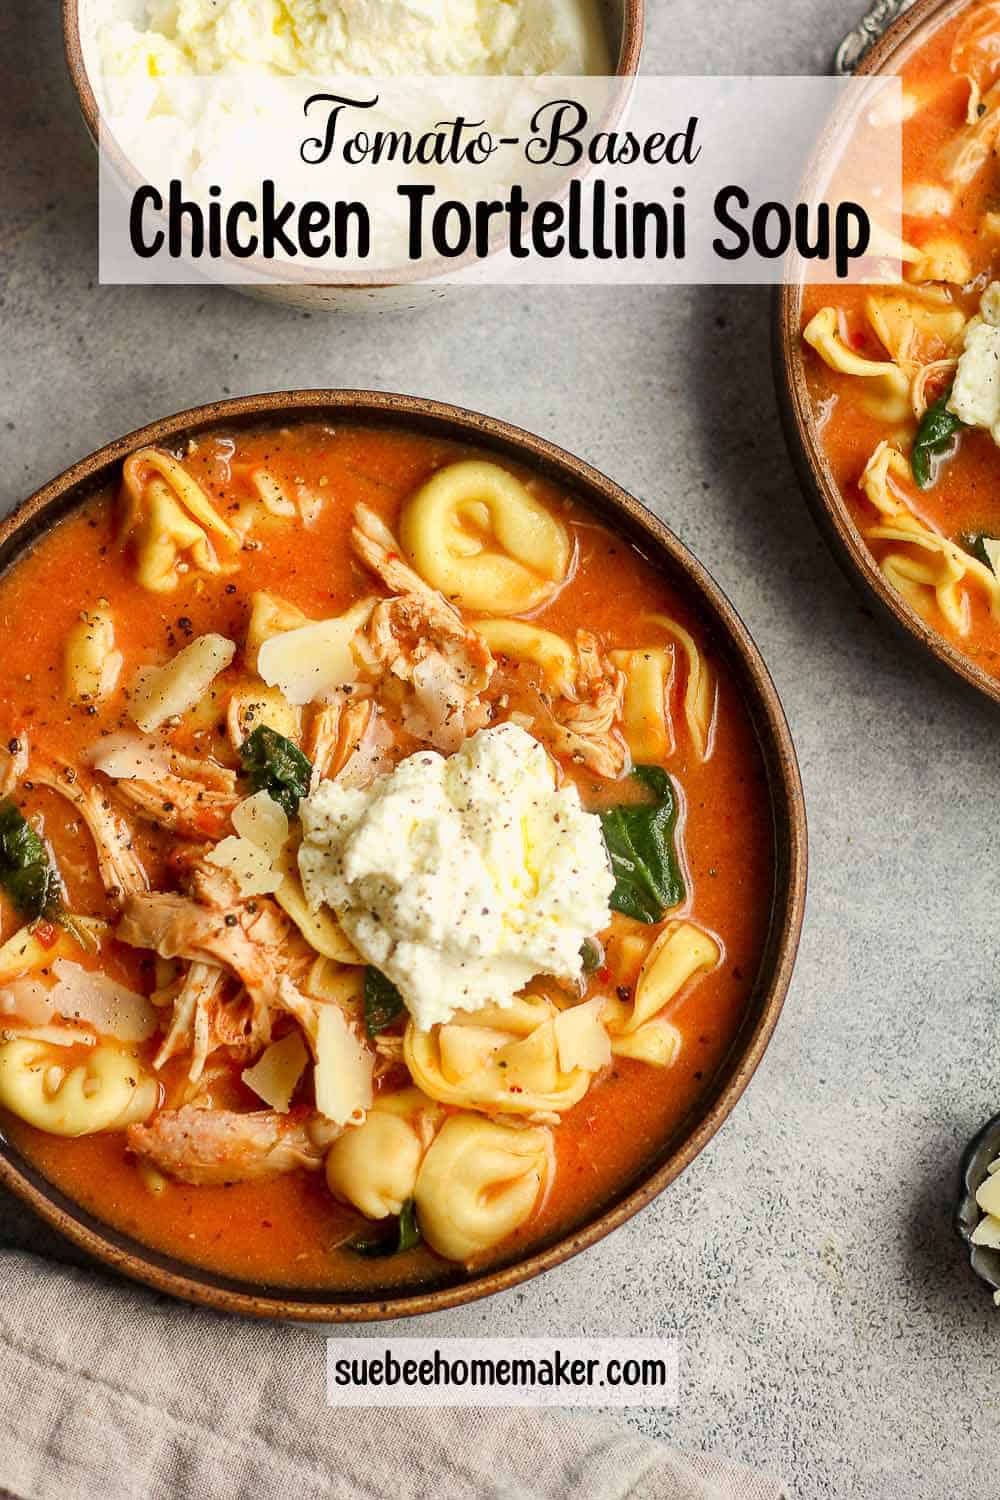 A shallow bowl of tomato-based chicken tortellini soup with ricotta cheese on top.